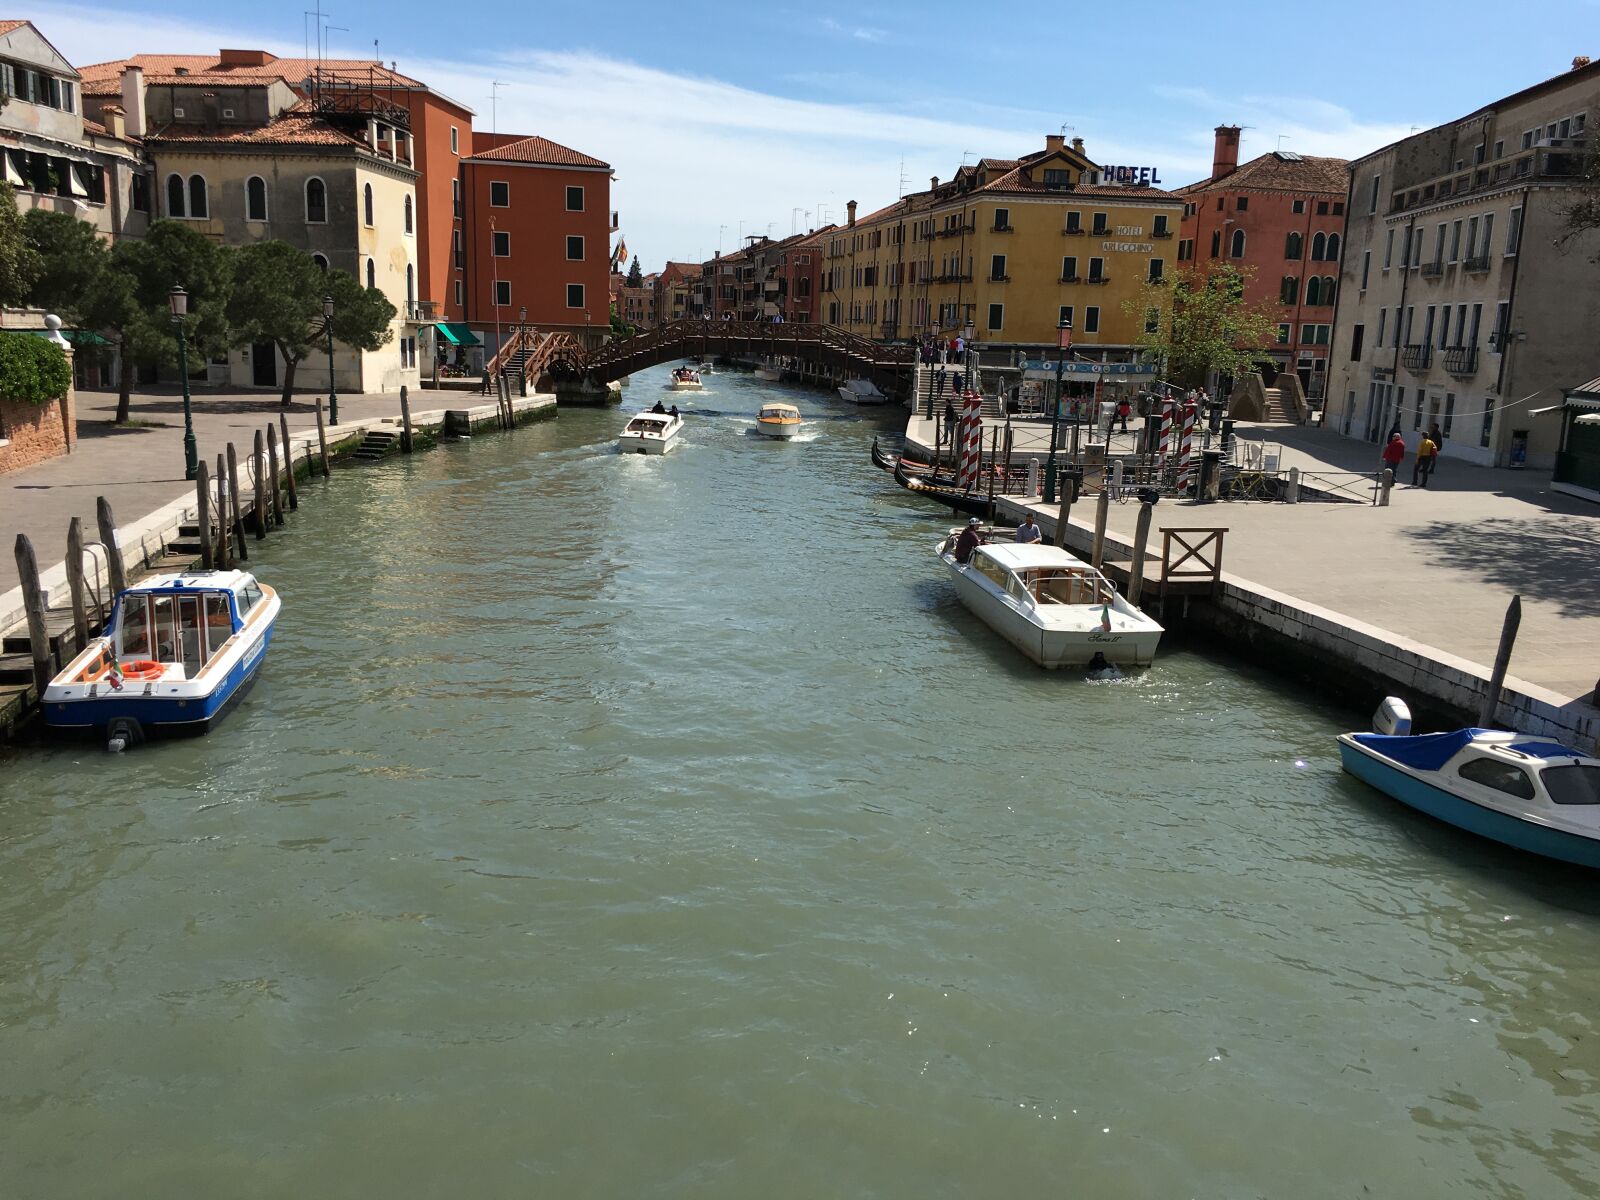 Apple iPhone 6s + iPhone 6s back camera 4.15mm f/2.2 sample photo. Venice, italy, city photography